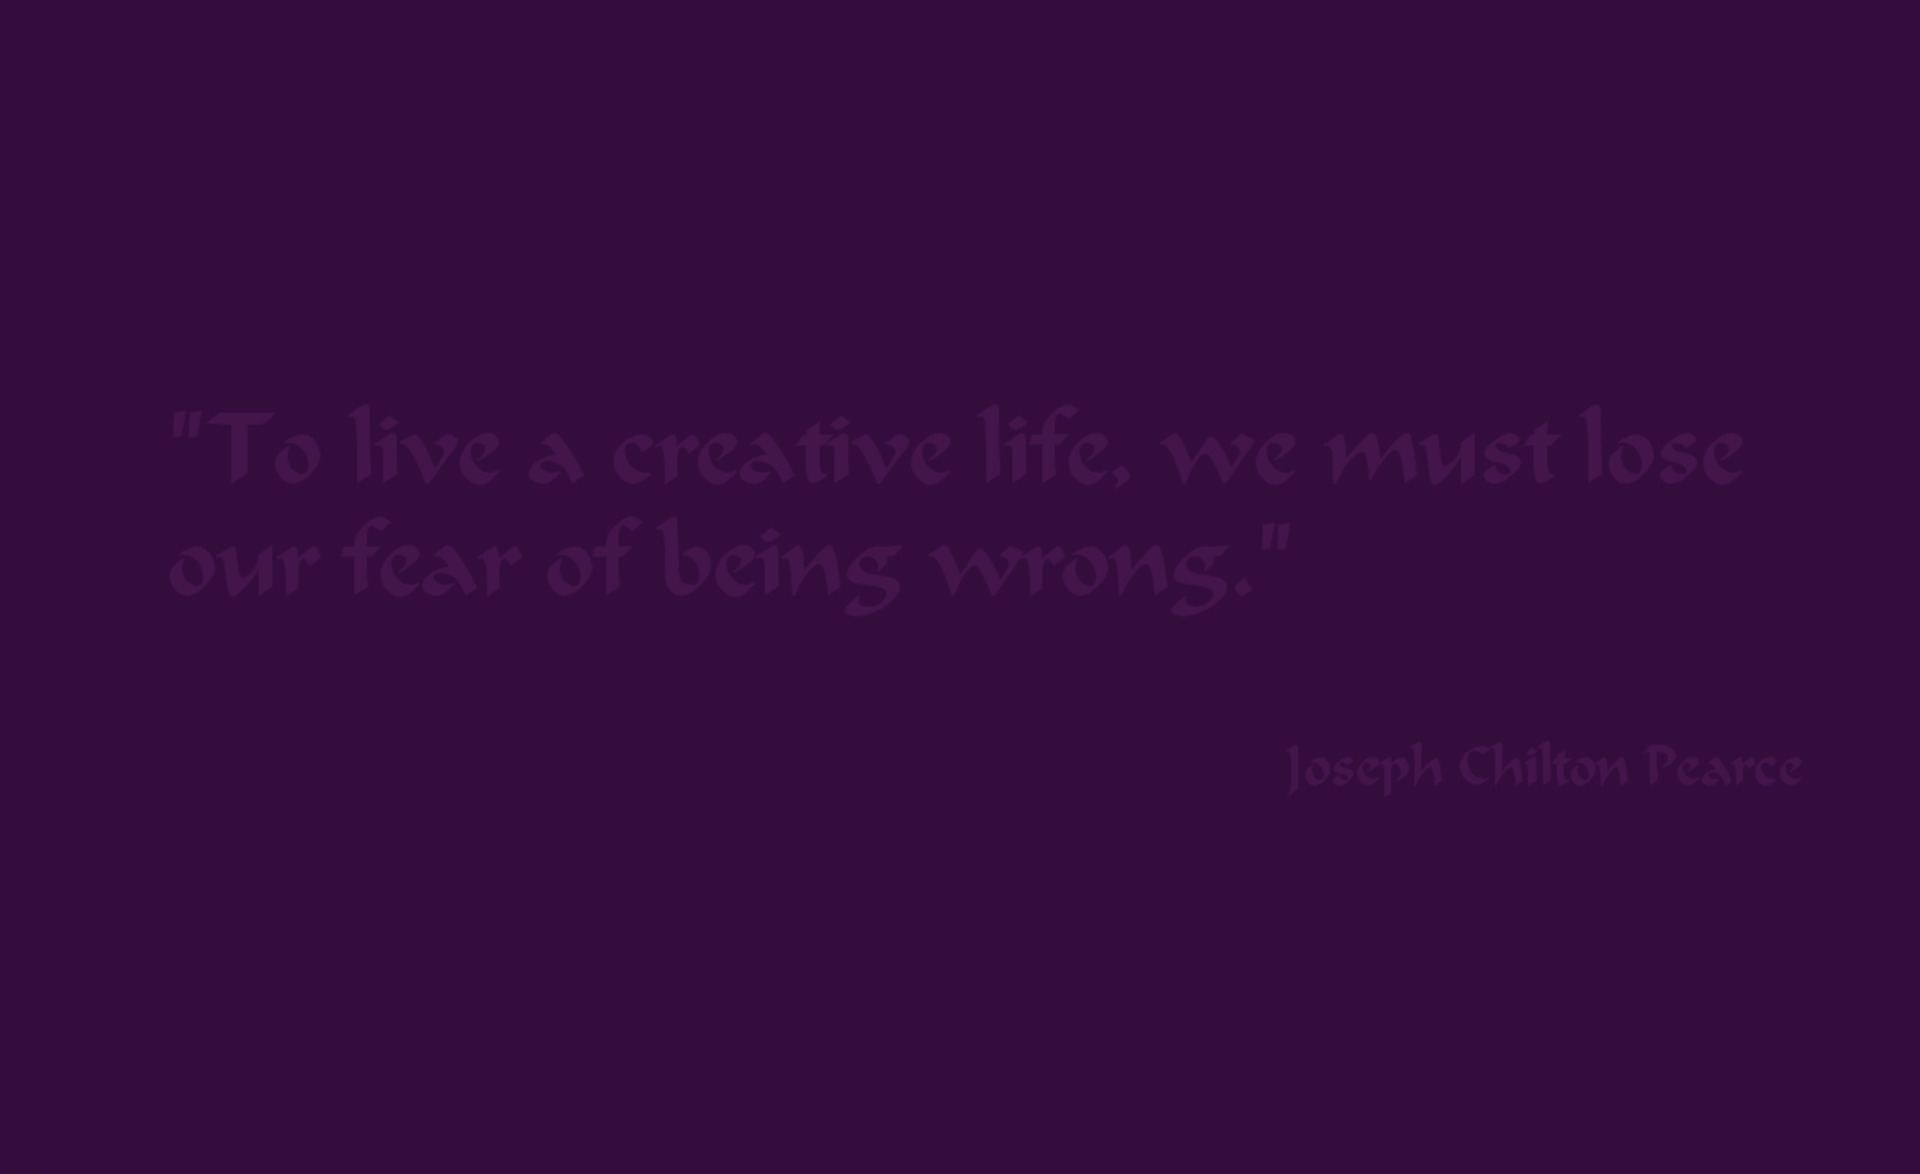 to live a creative life,we must lose